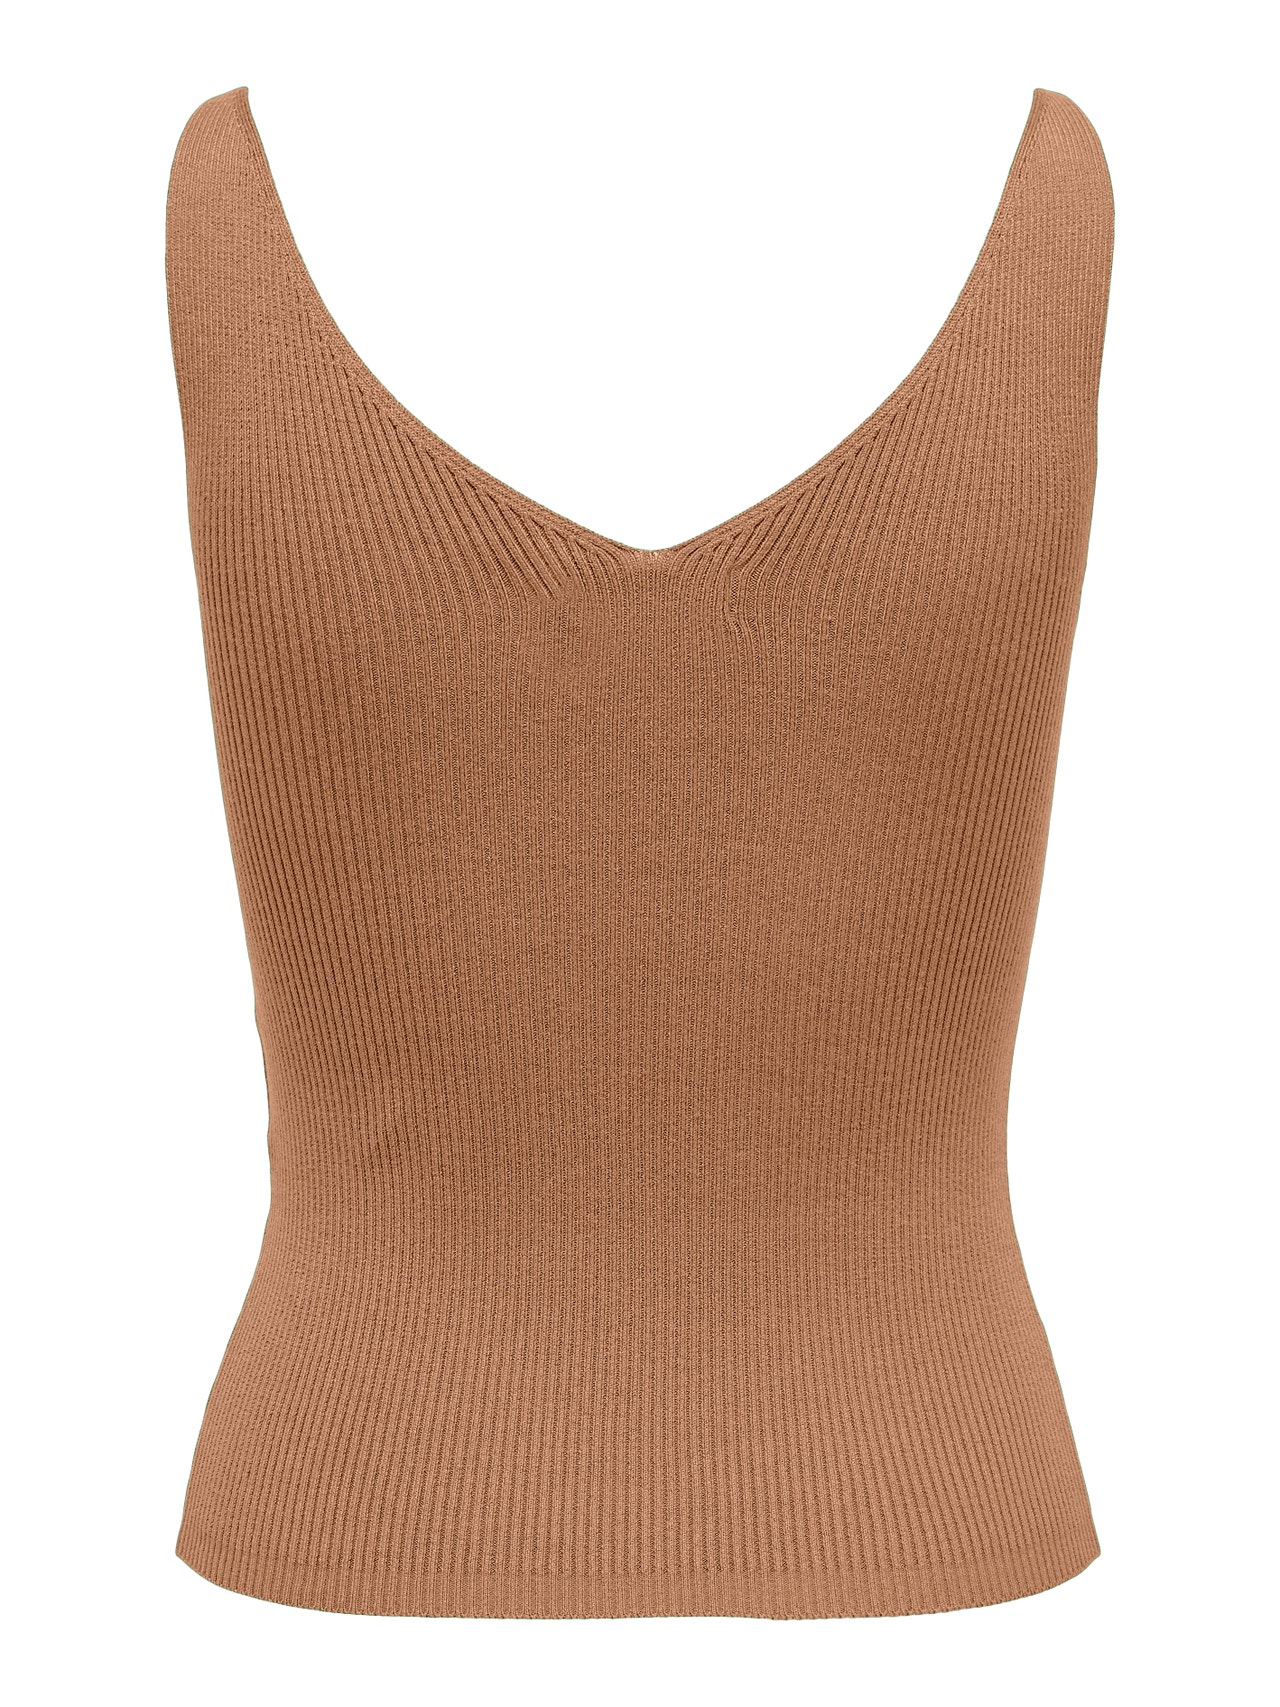 ONLY Knitted top -Indian Tan - 15180497